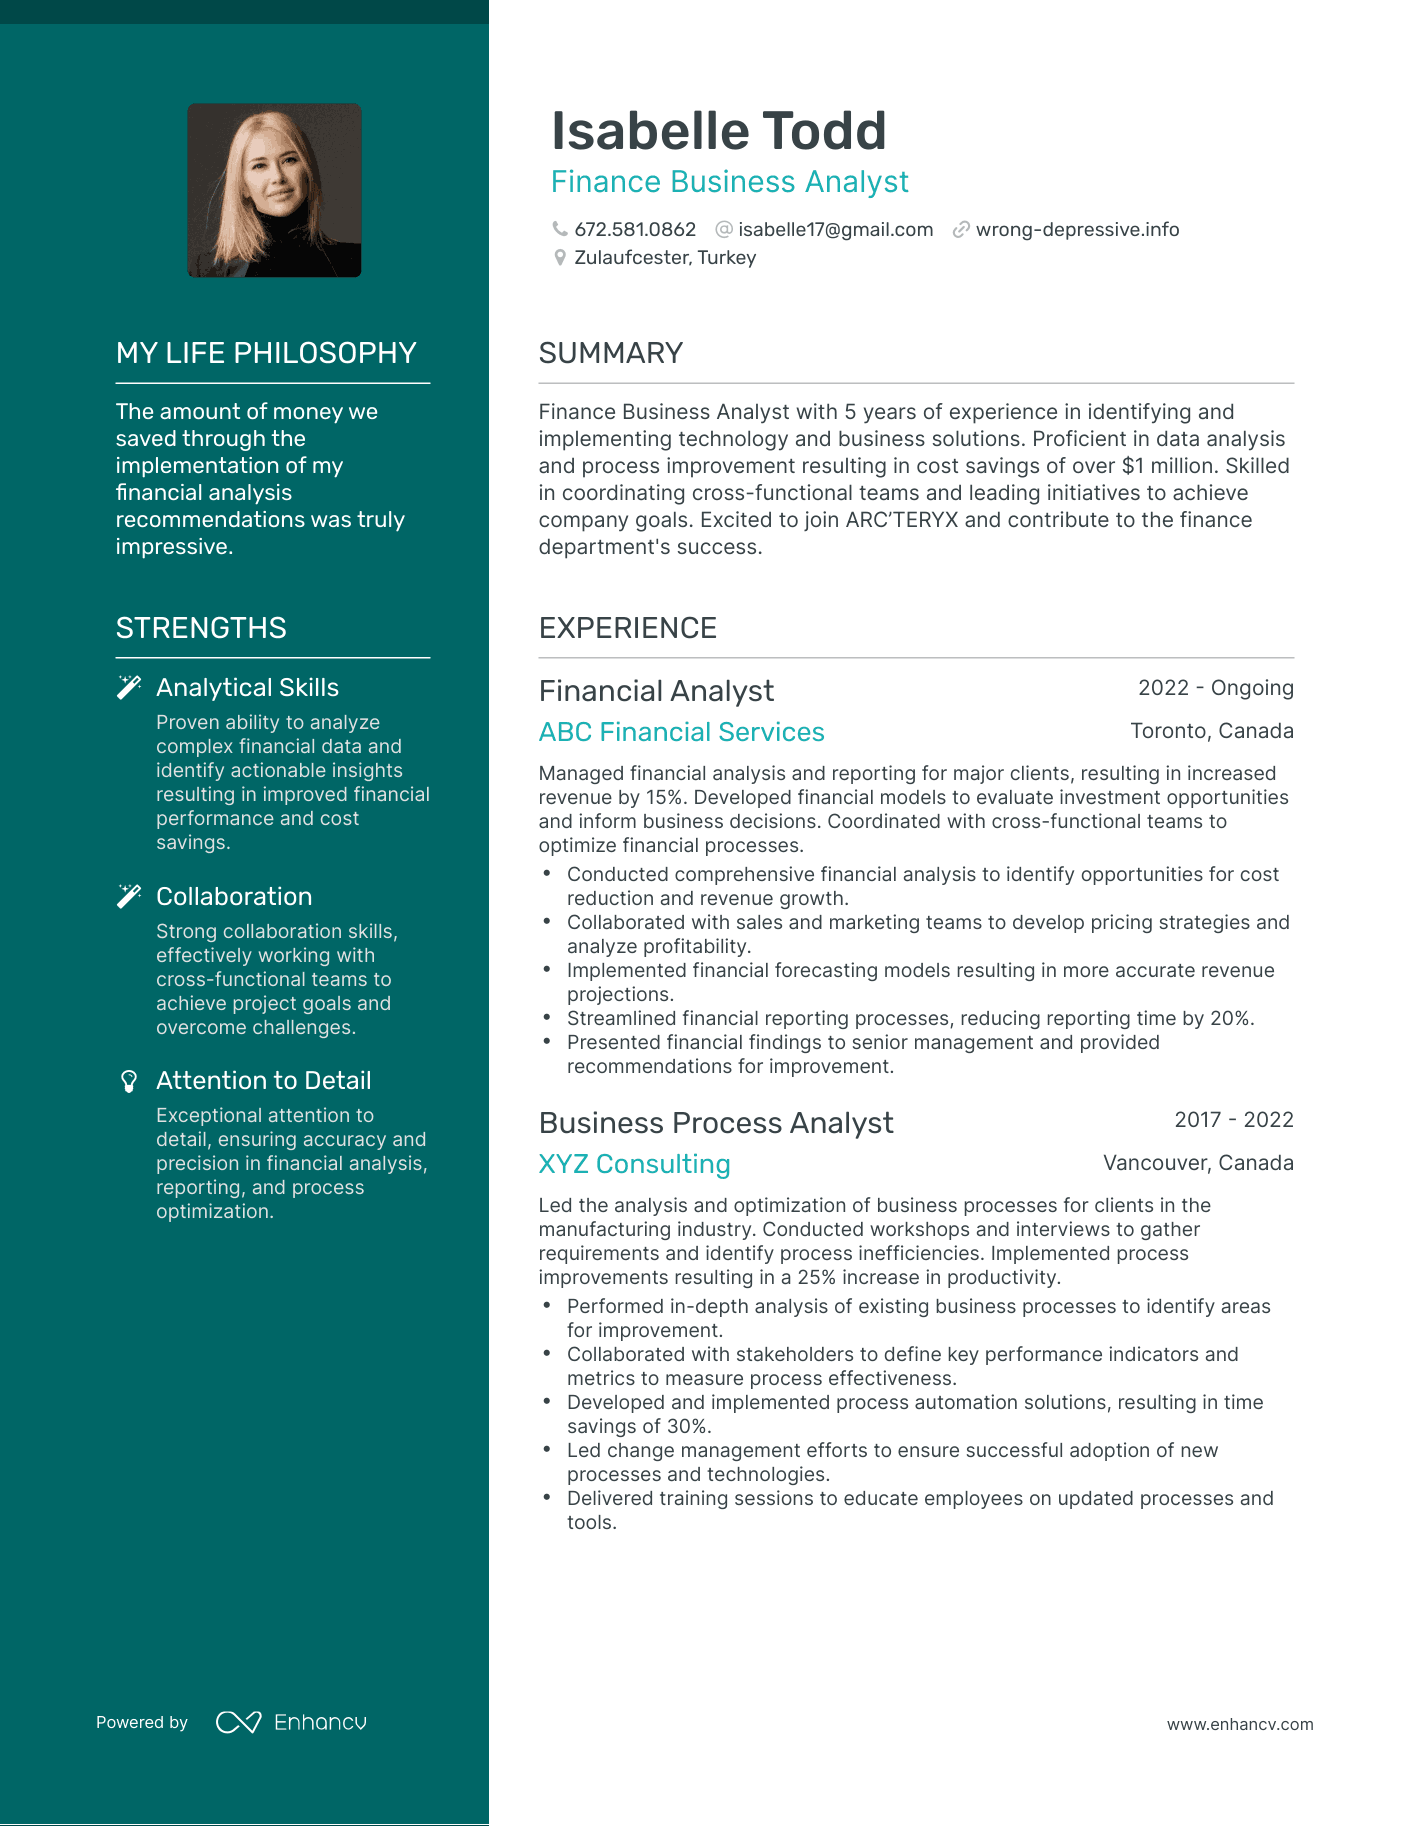 Finance Business Analyst resume example